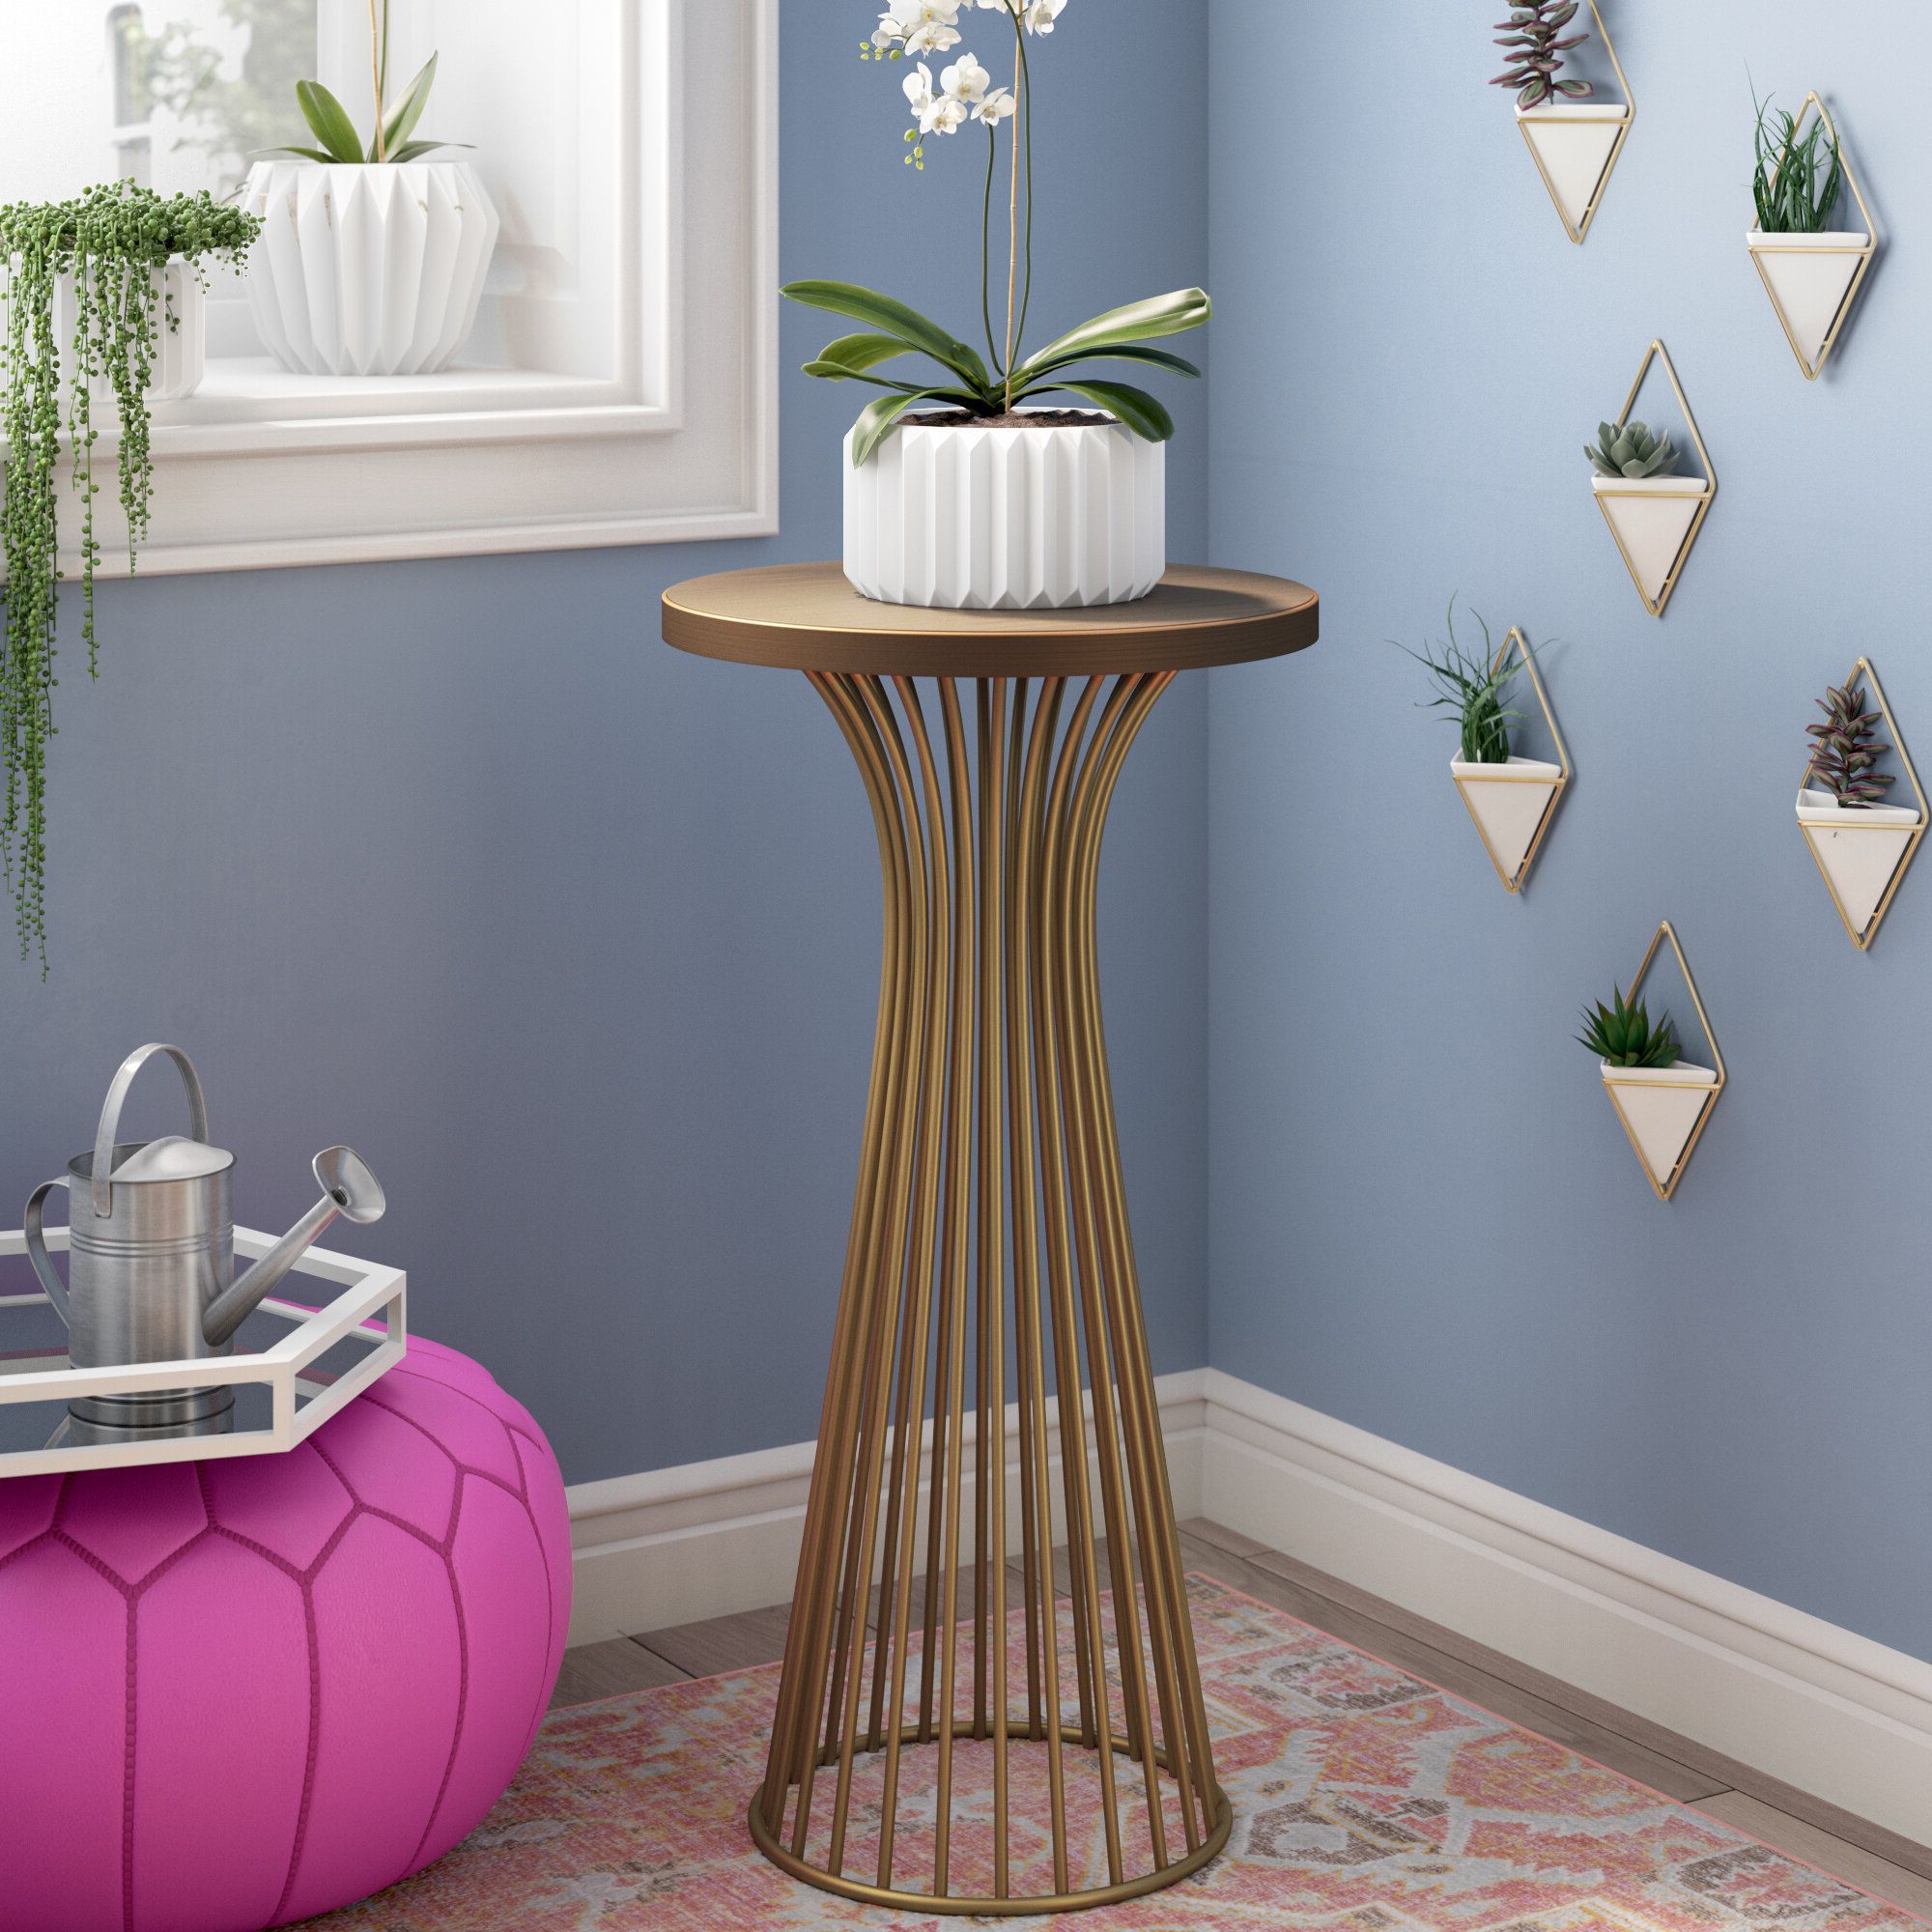 Pedestal Plant Stands & Tables You'll Love In  (View 4 of 10)